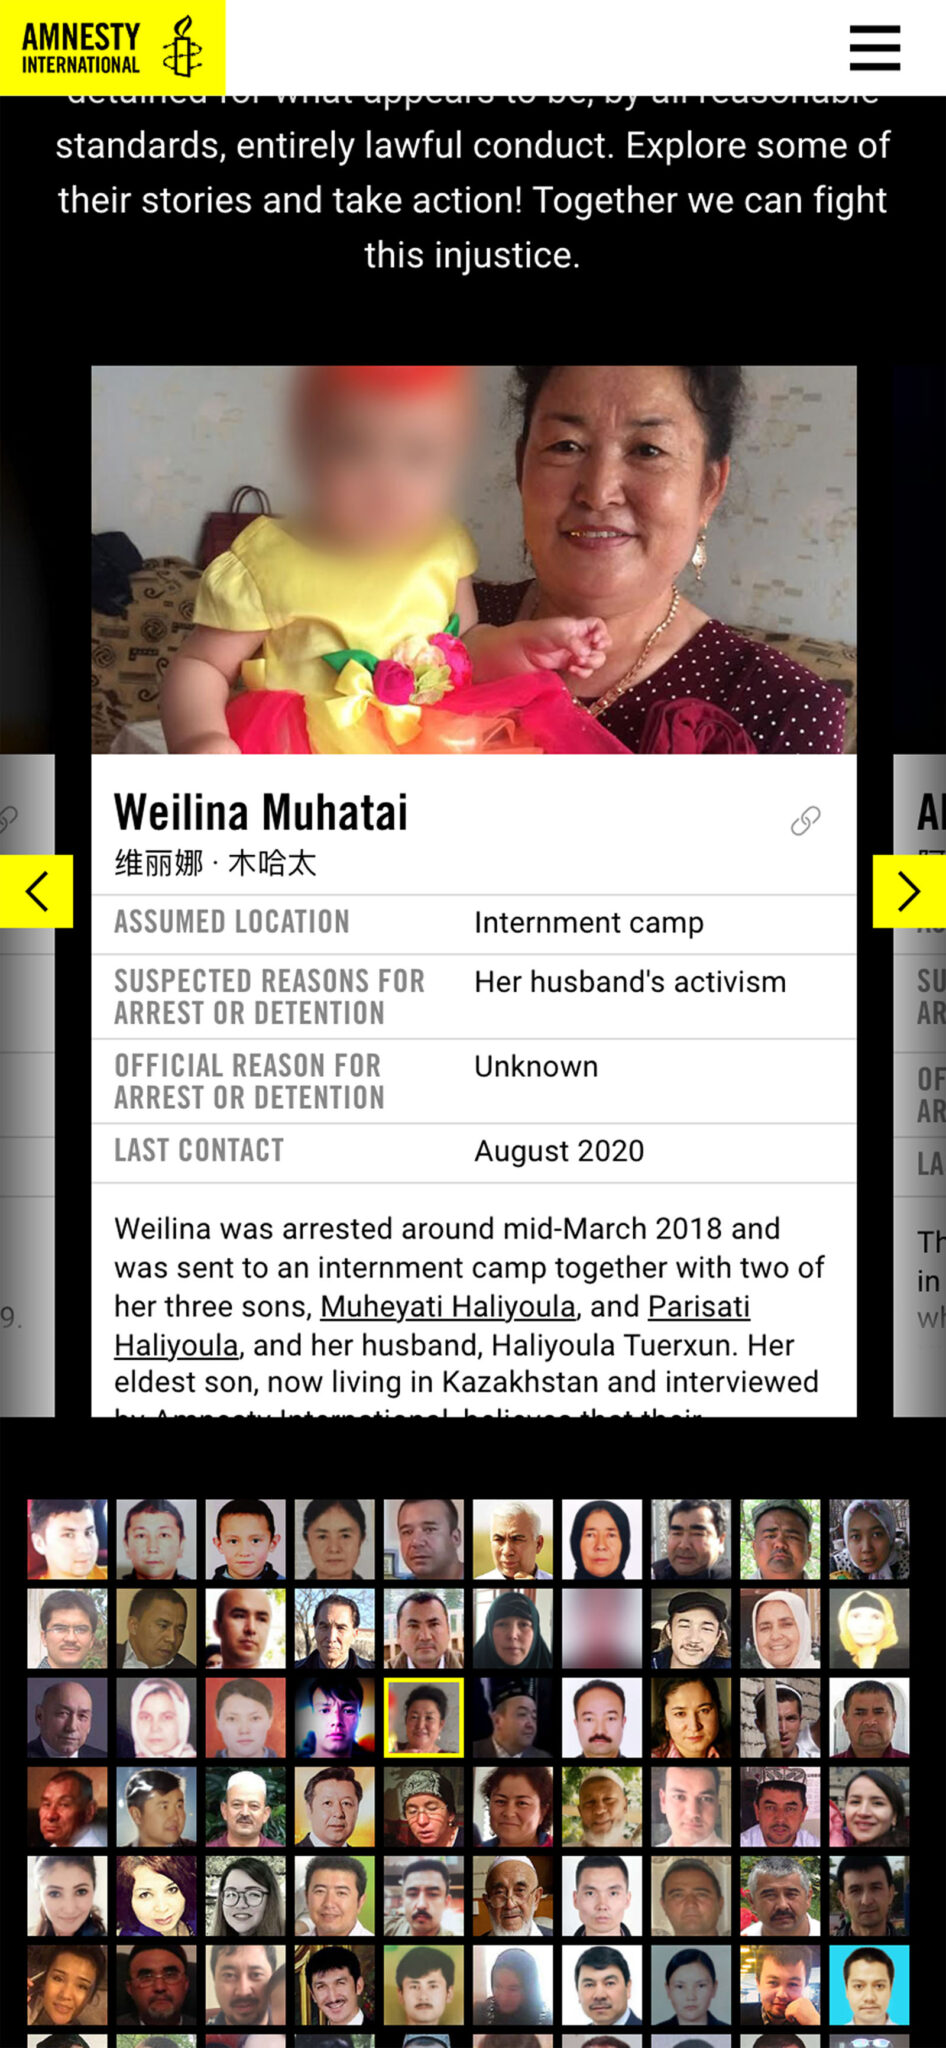 Xinjiang Report, details of an individual detained person